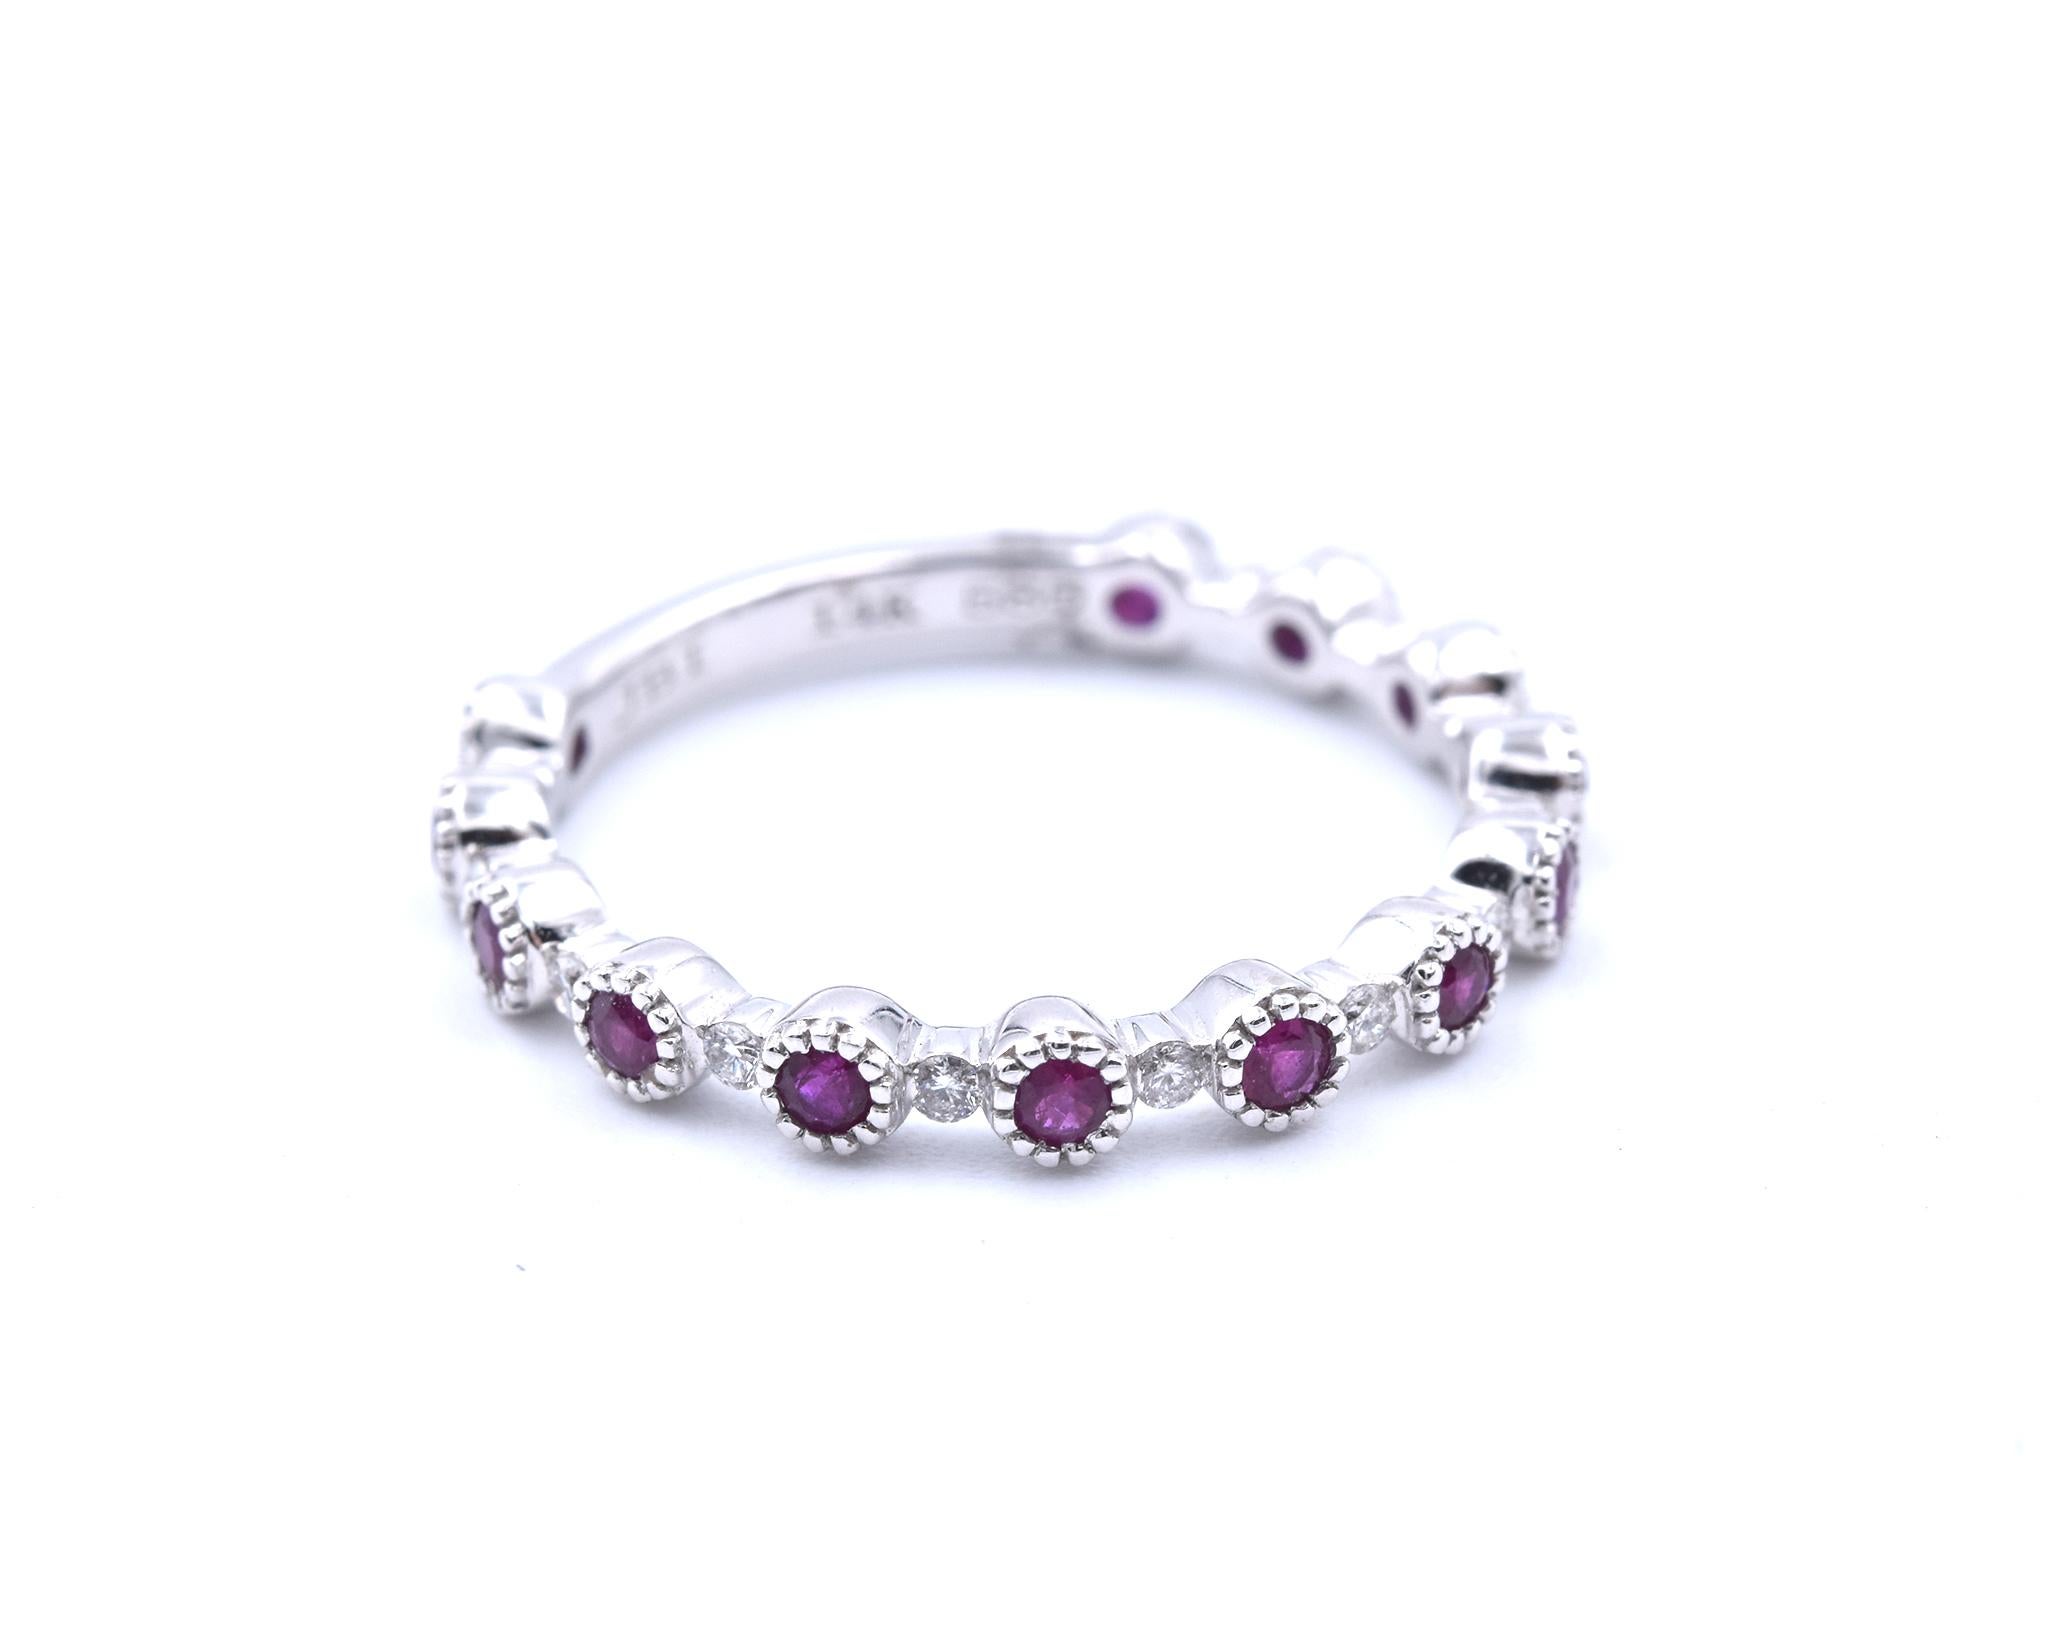 Material: 14k white gold
Diamonds: 12 round brilliant cut= .20cttw
Color: G
Clarity: VS
Ruby: 13 round brilliant cut = .53cttw
Size: 5.5 please allow two additional shipping days for sizing requests)
Dimensions: ring is 2.71mm wide
Weight: 2.10